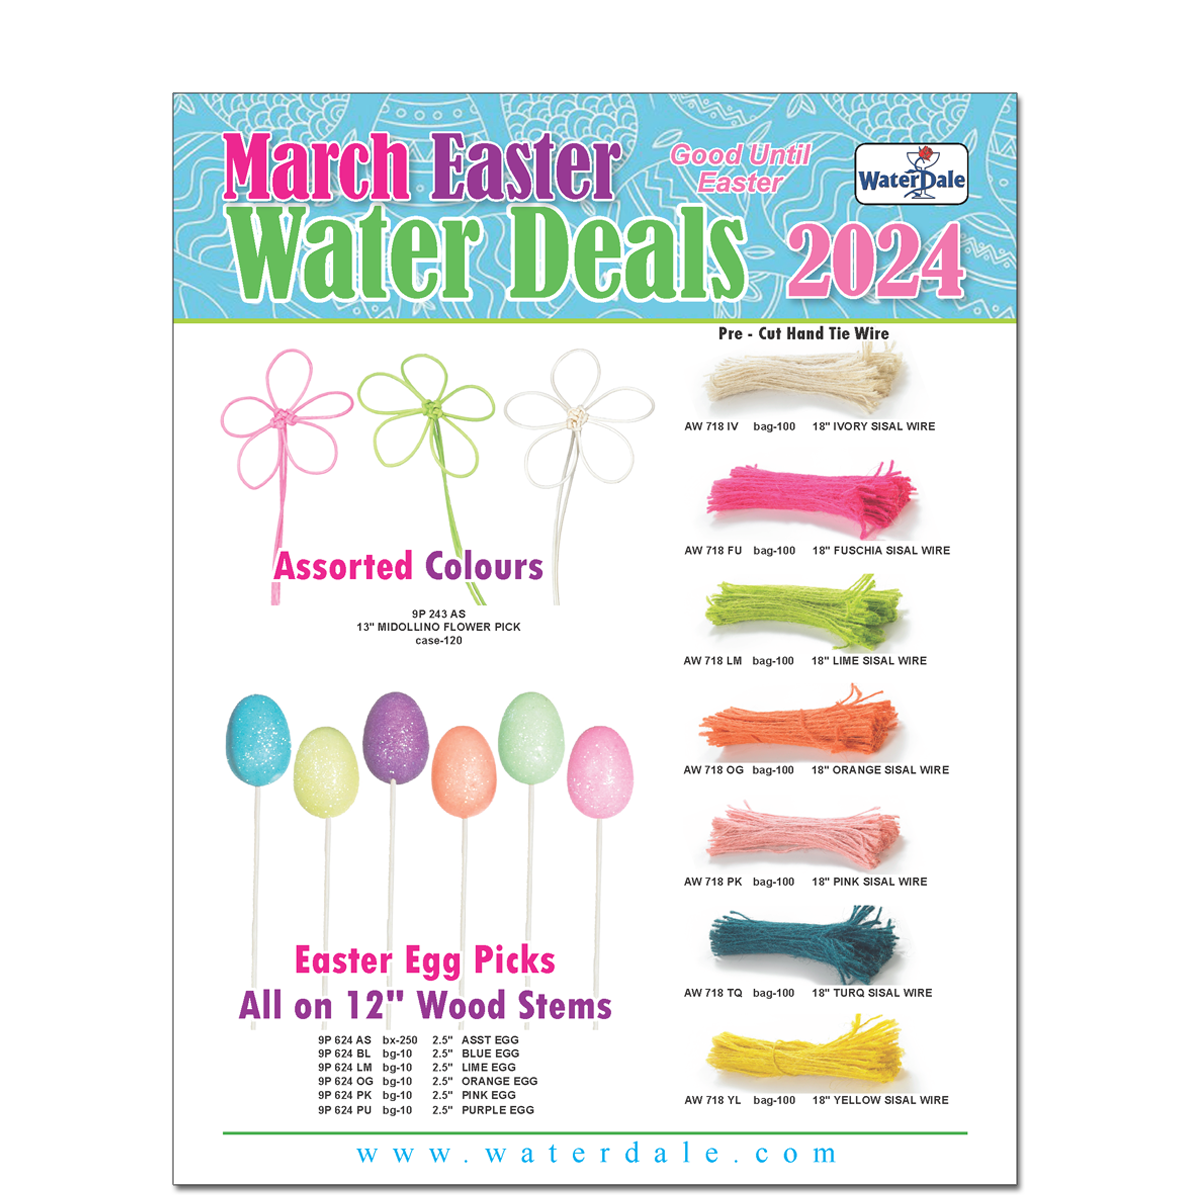 March Easter Deals 2024